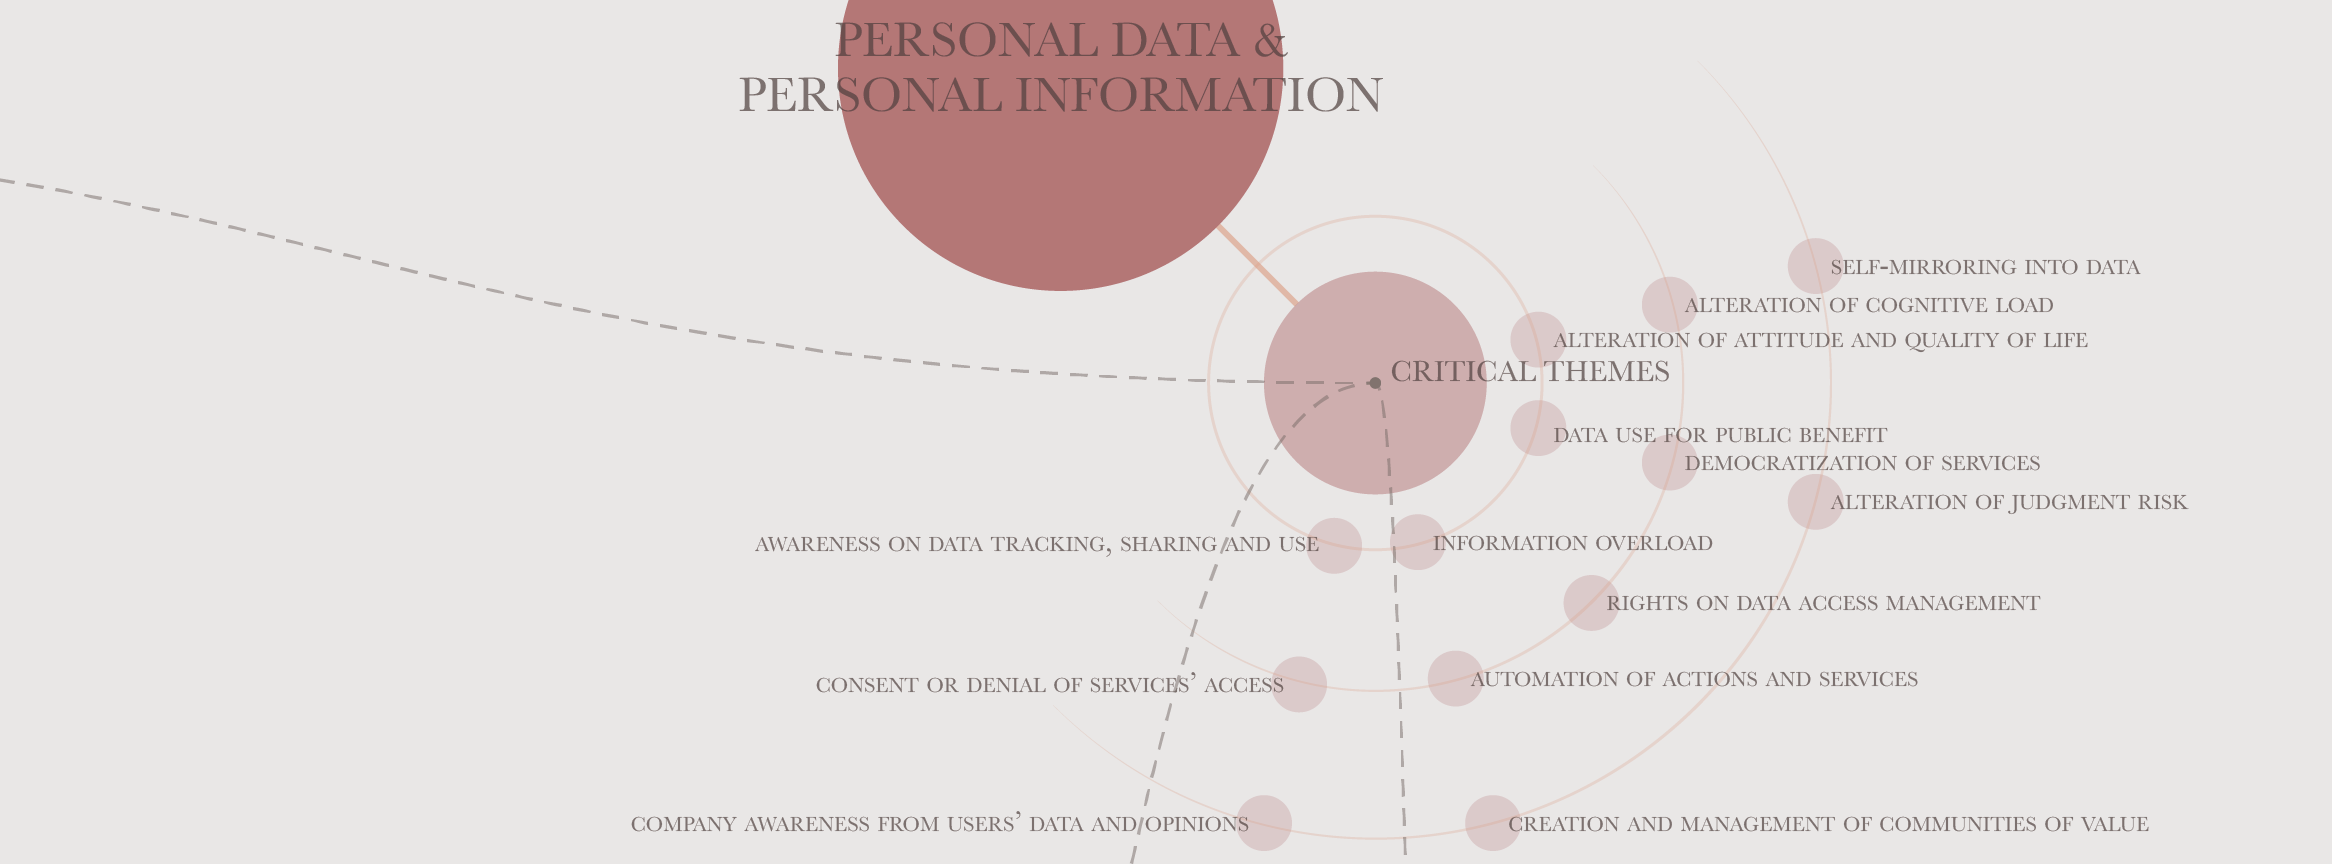 12 Critical Themes on the Use of Personal Information